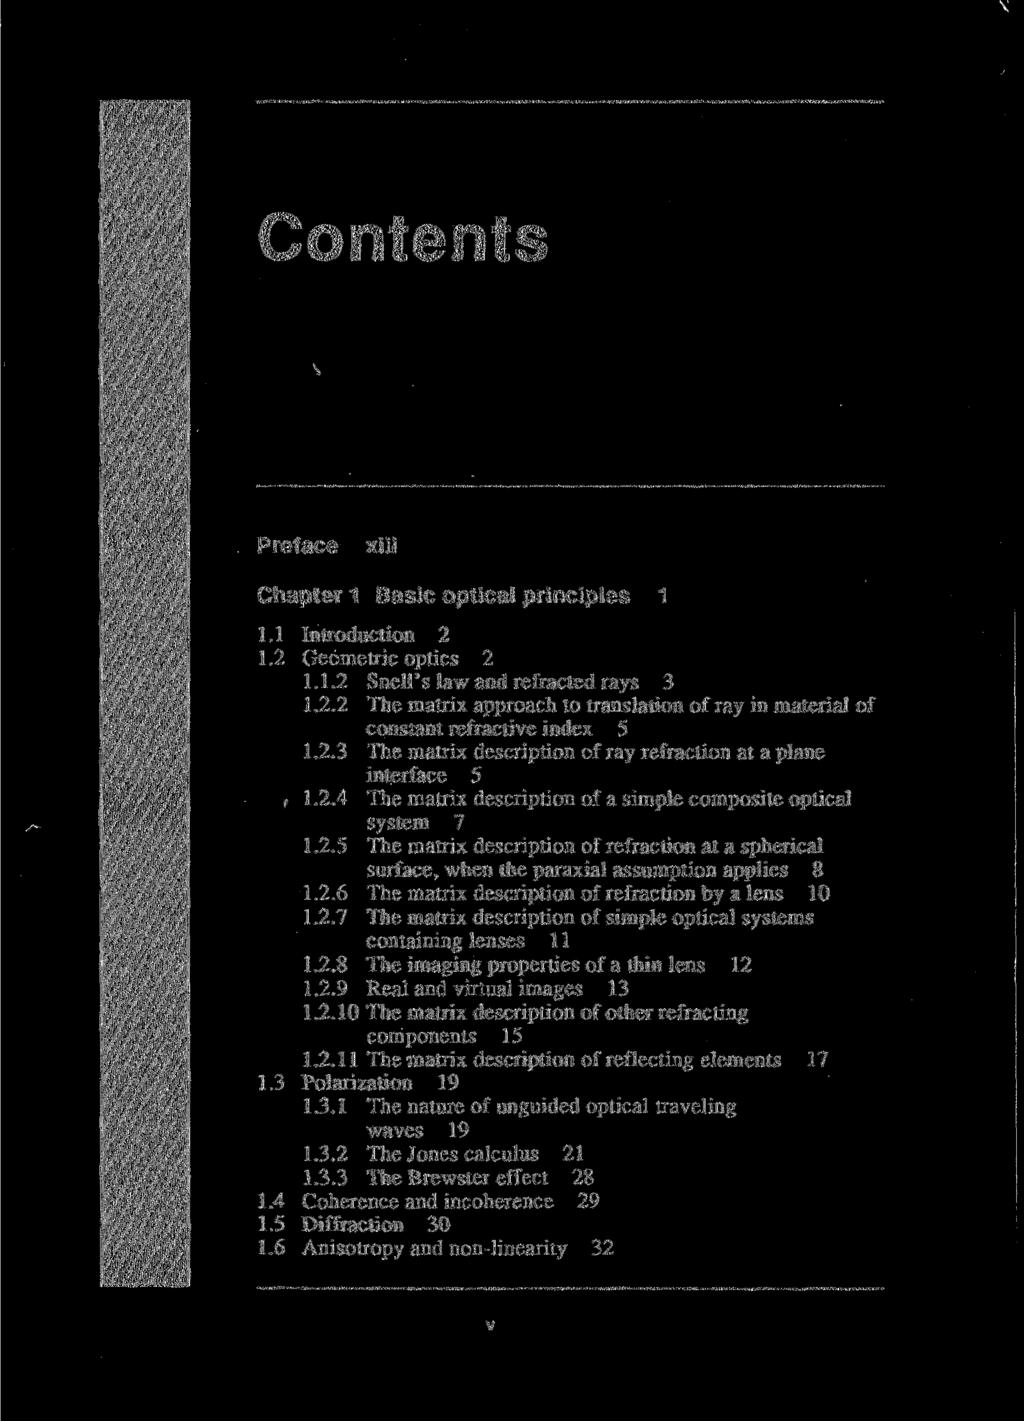 v Contents Preface xiii Chapter 1 Basic optical principles 1 1.1 Introduction 2 1.2 Geometric optics 2 1.1.2 Snell's law and refracted rays 3 1.2.2 The matrix approach to translation of ray in material of constant refractive index 5 1.